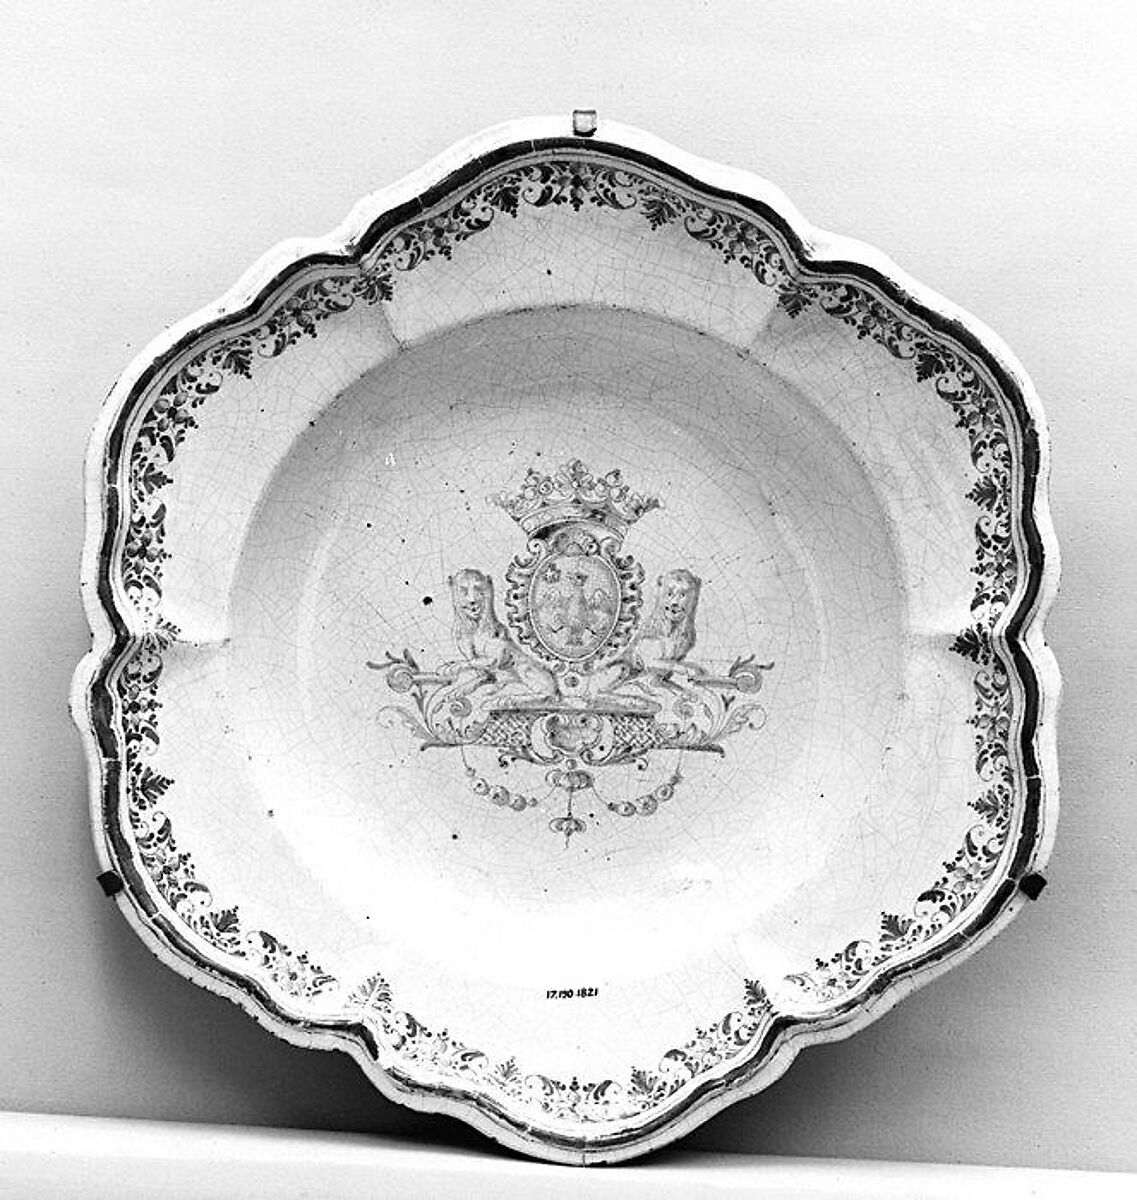 Platter, Jacques Hustin (died 1749), Faience (tin-glazed earthenware), French, Bordeaux 